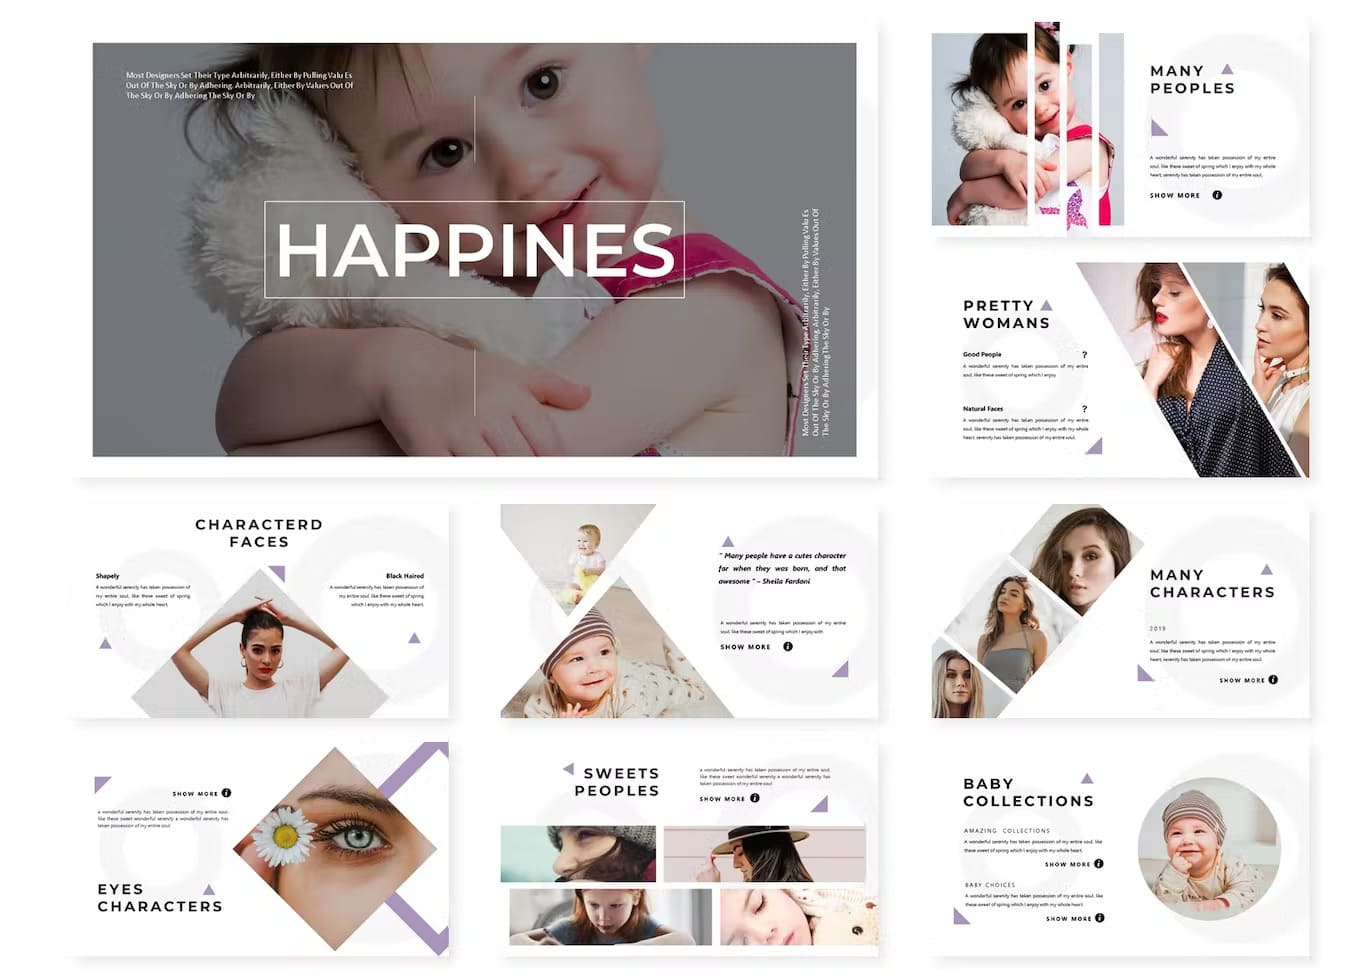 Images of eyes characters for Happines | Keynote Template.